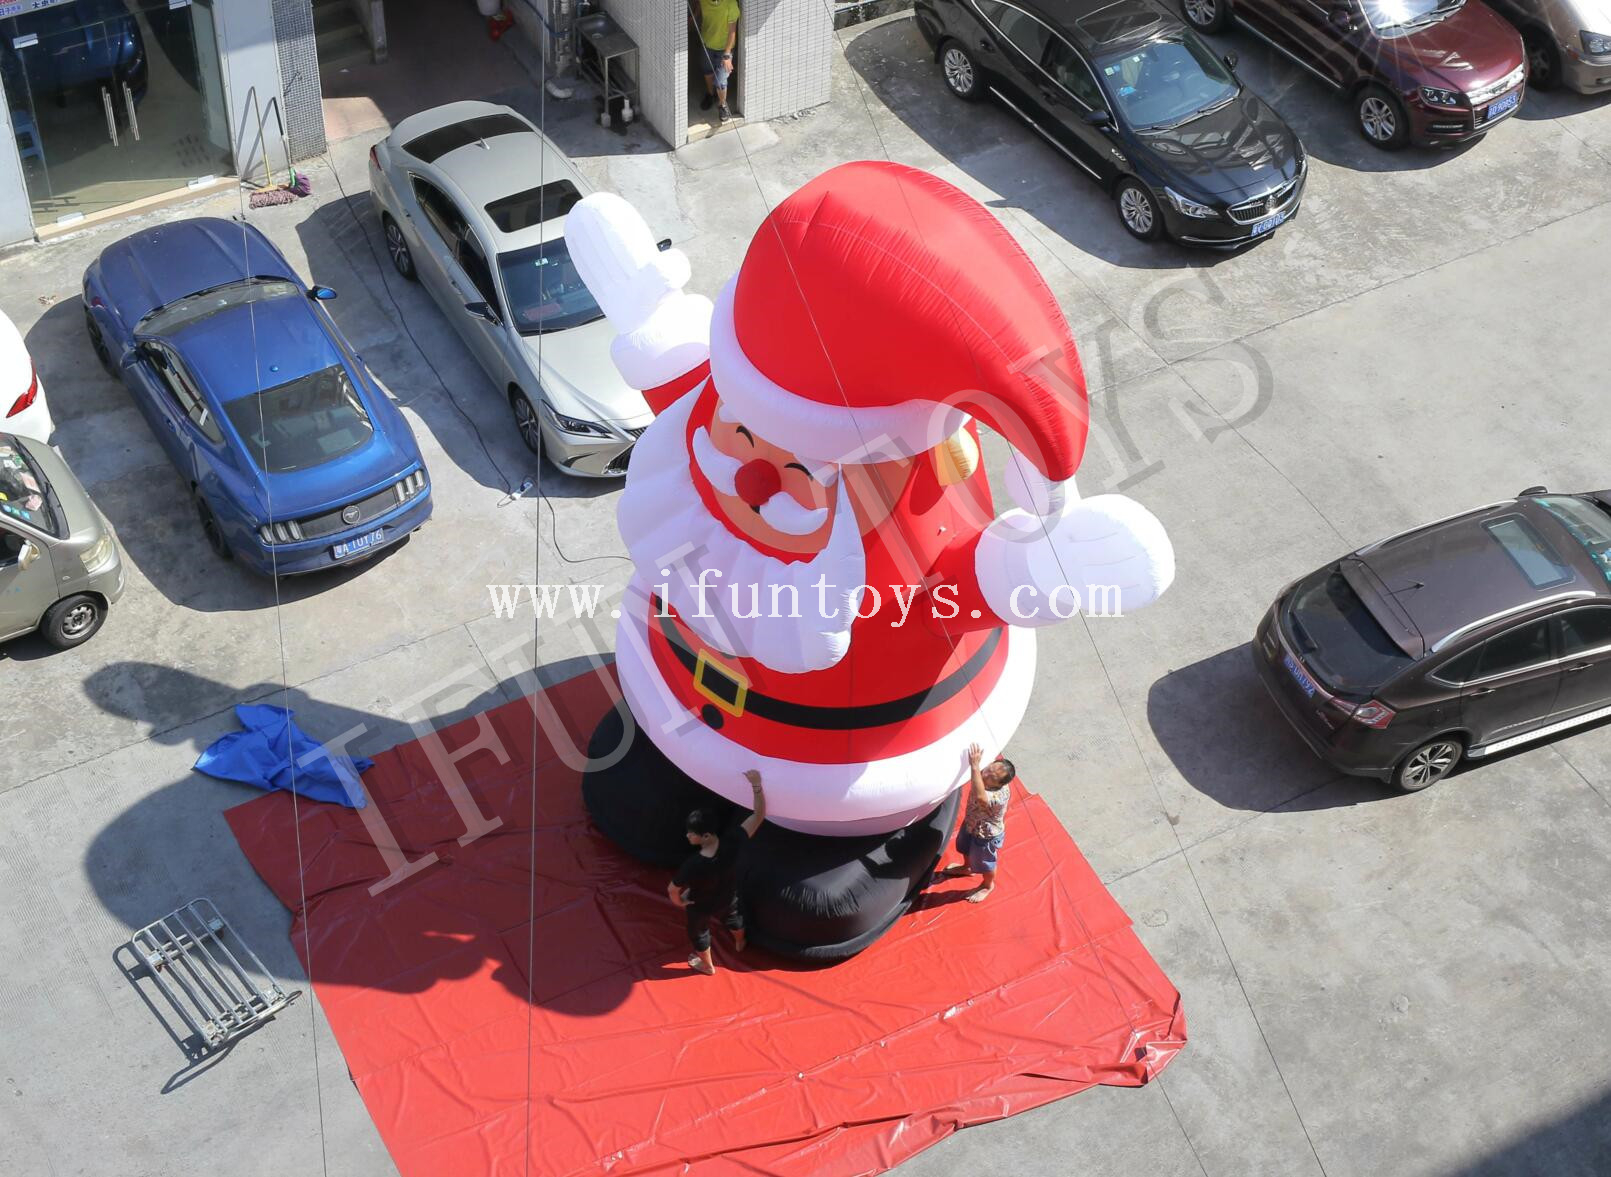 6m Tall Inflatable Santa Claus for Christmas Decoration